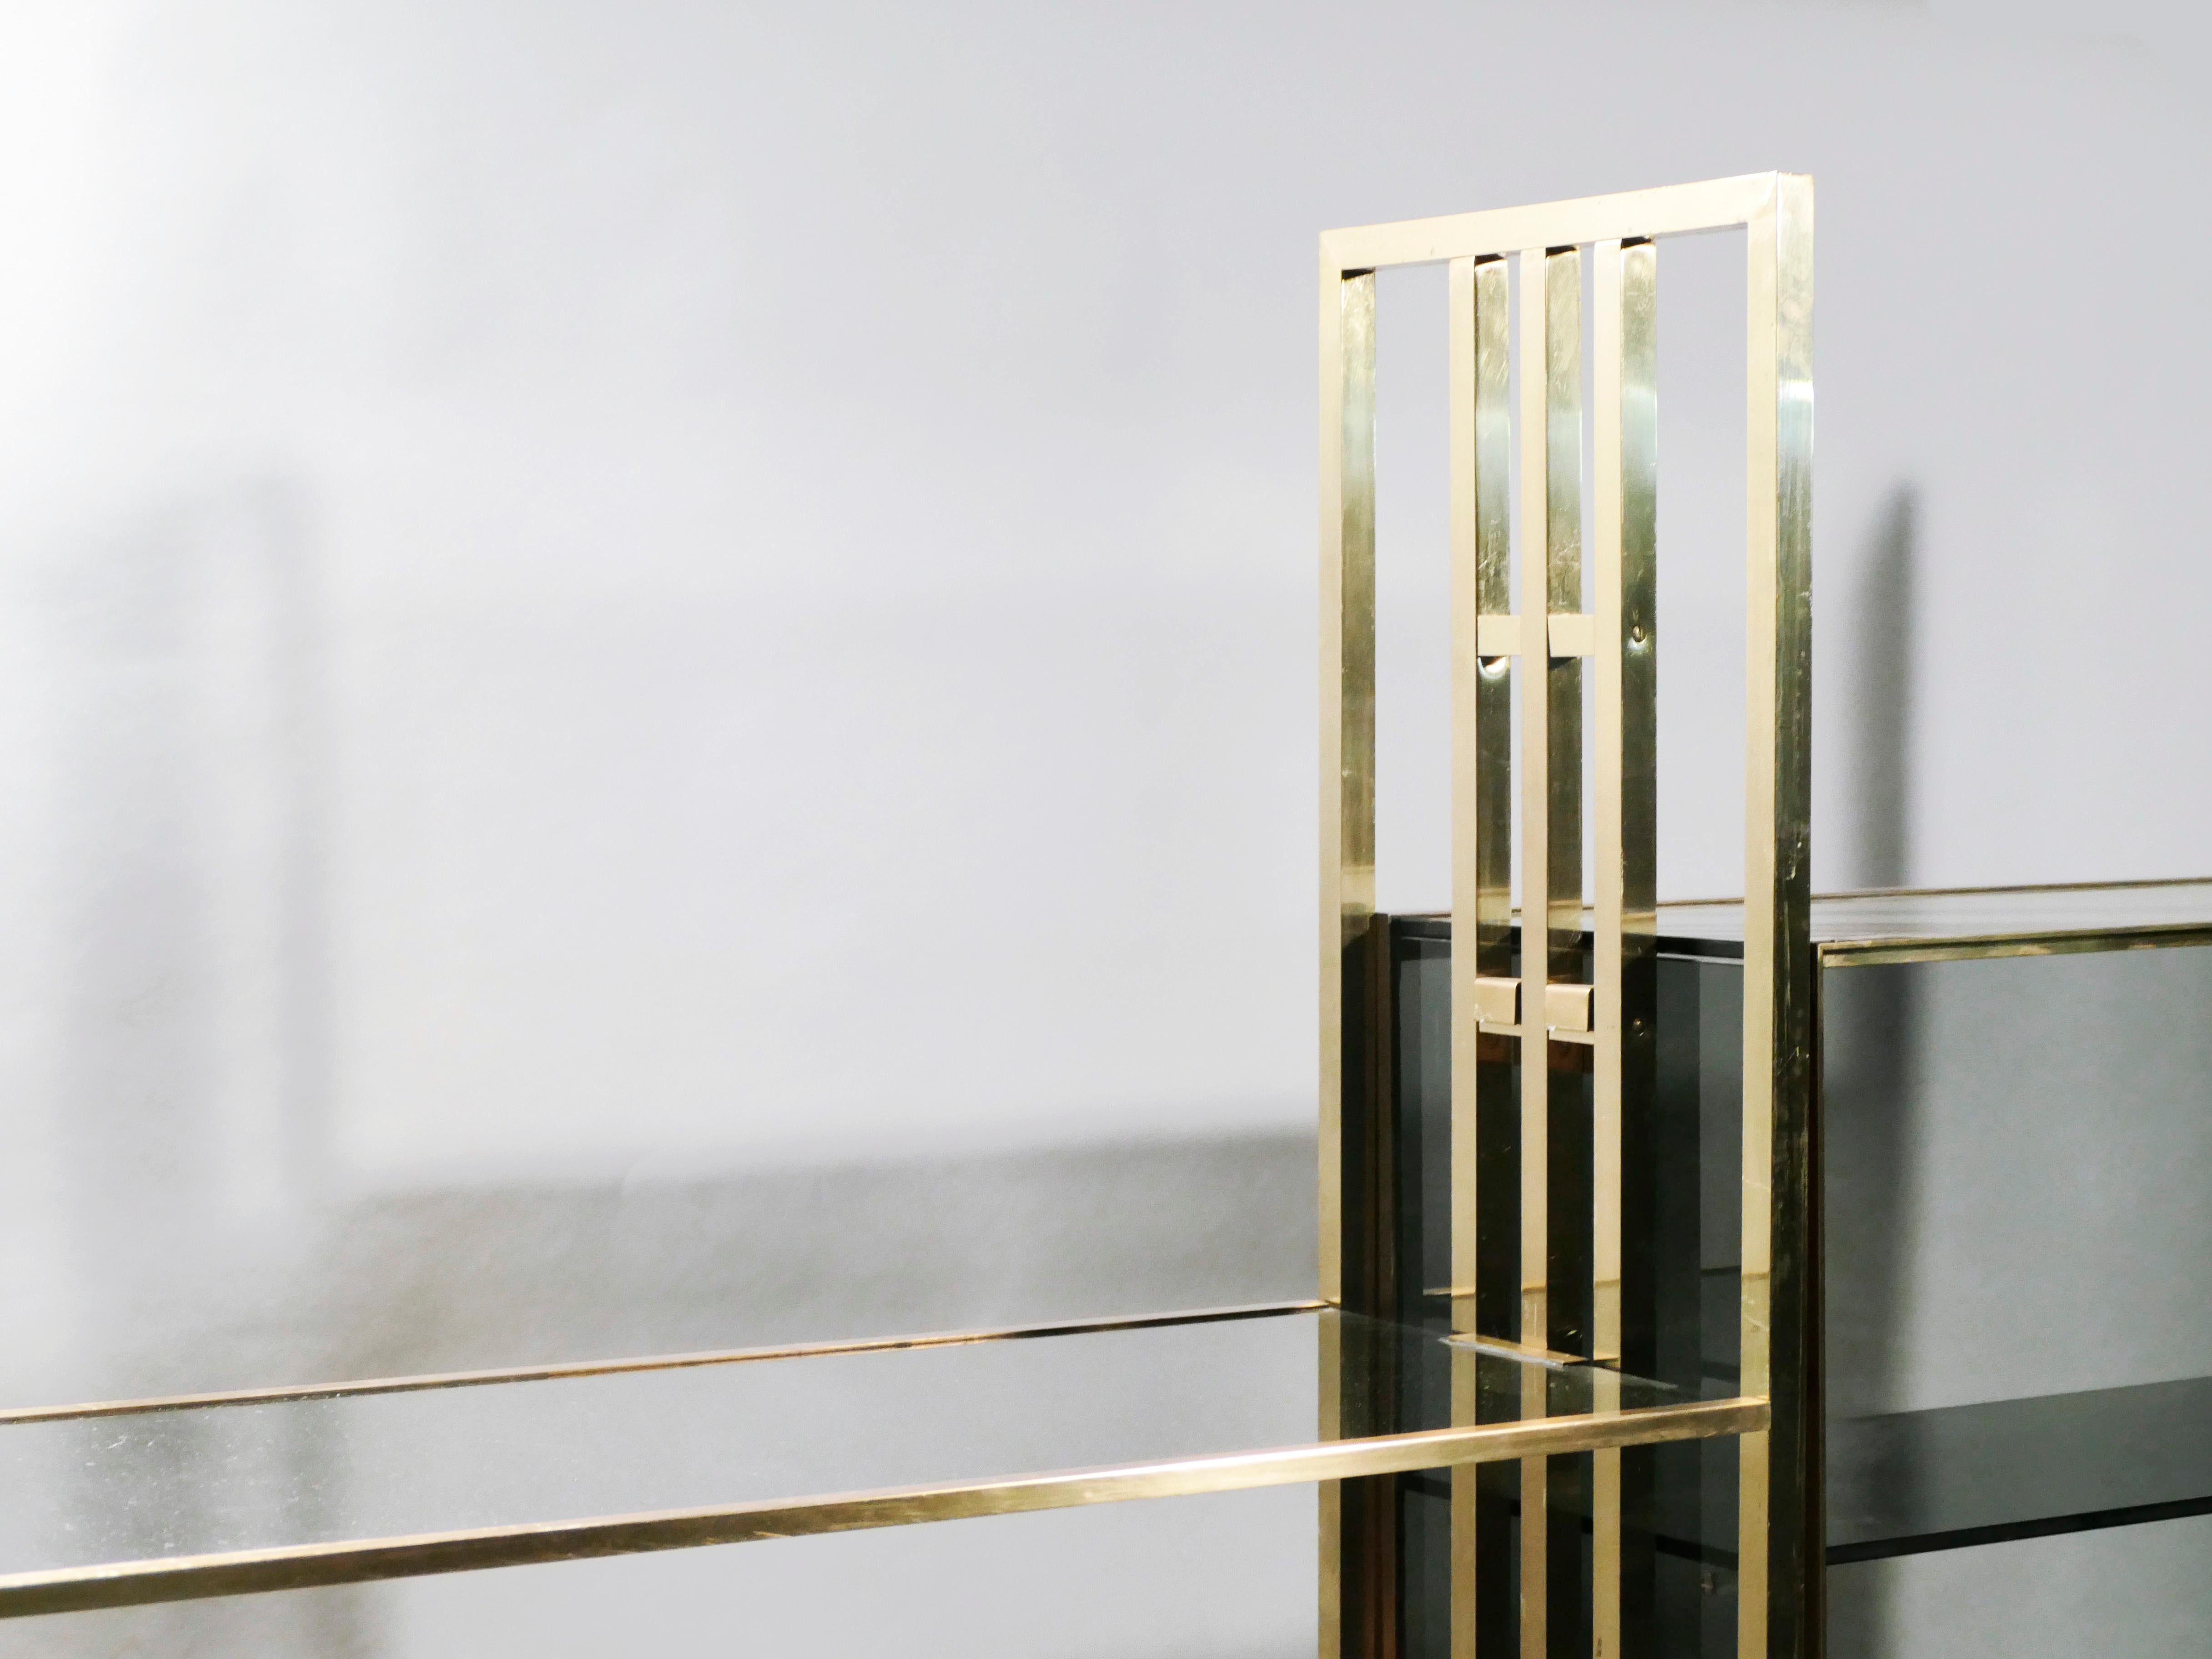 Rare Kim Moltzer French Lacquer and Brass Shelves, 1970s For Sale 7